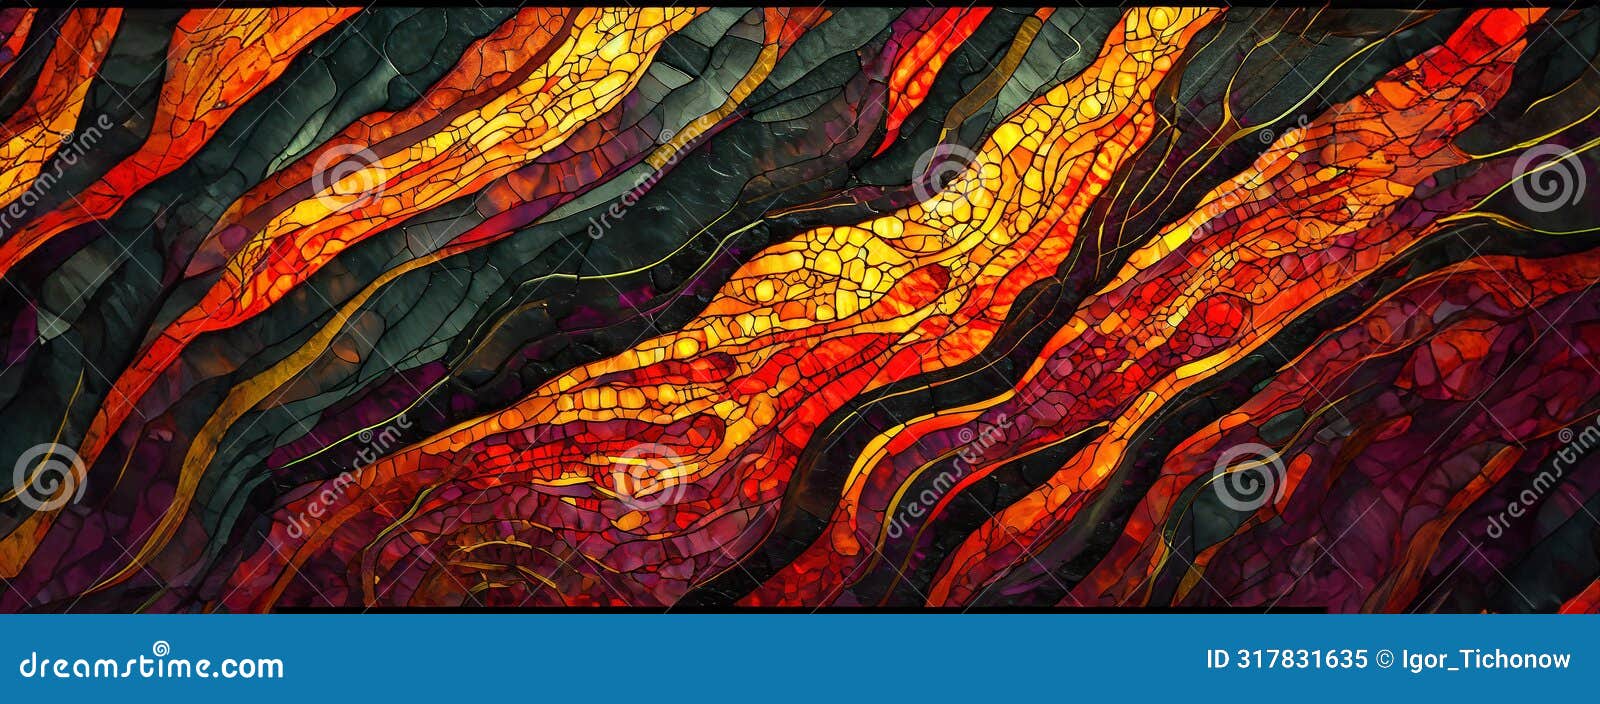 fiery abstract ribbons dance in a crackle texture embrace. sinuous forms interlace in a vibrant display of fiery hues